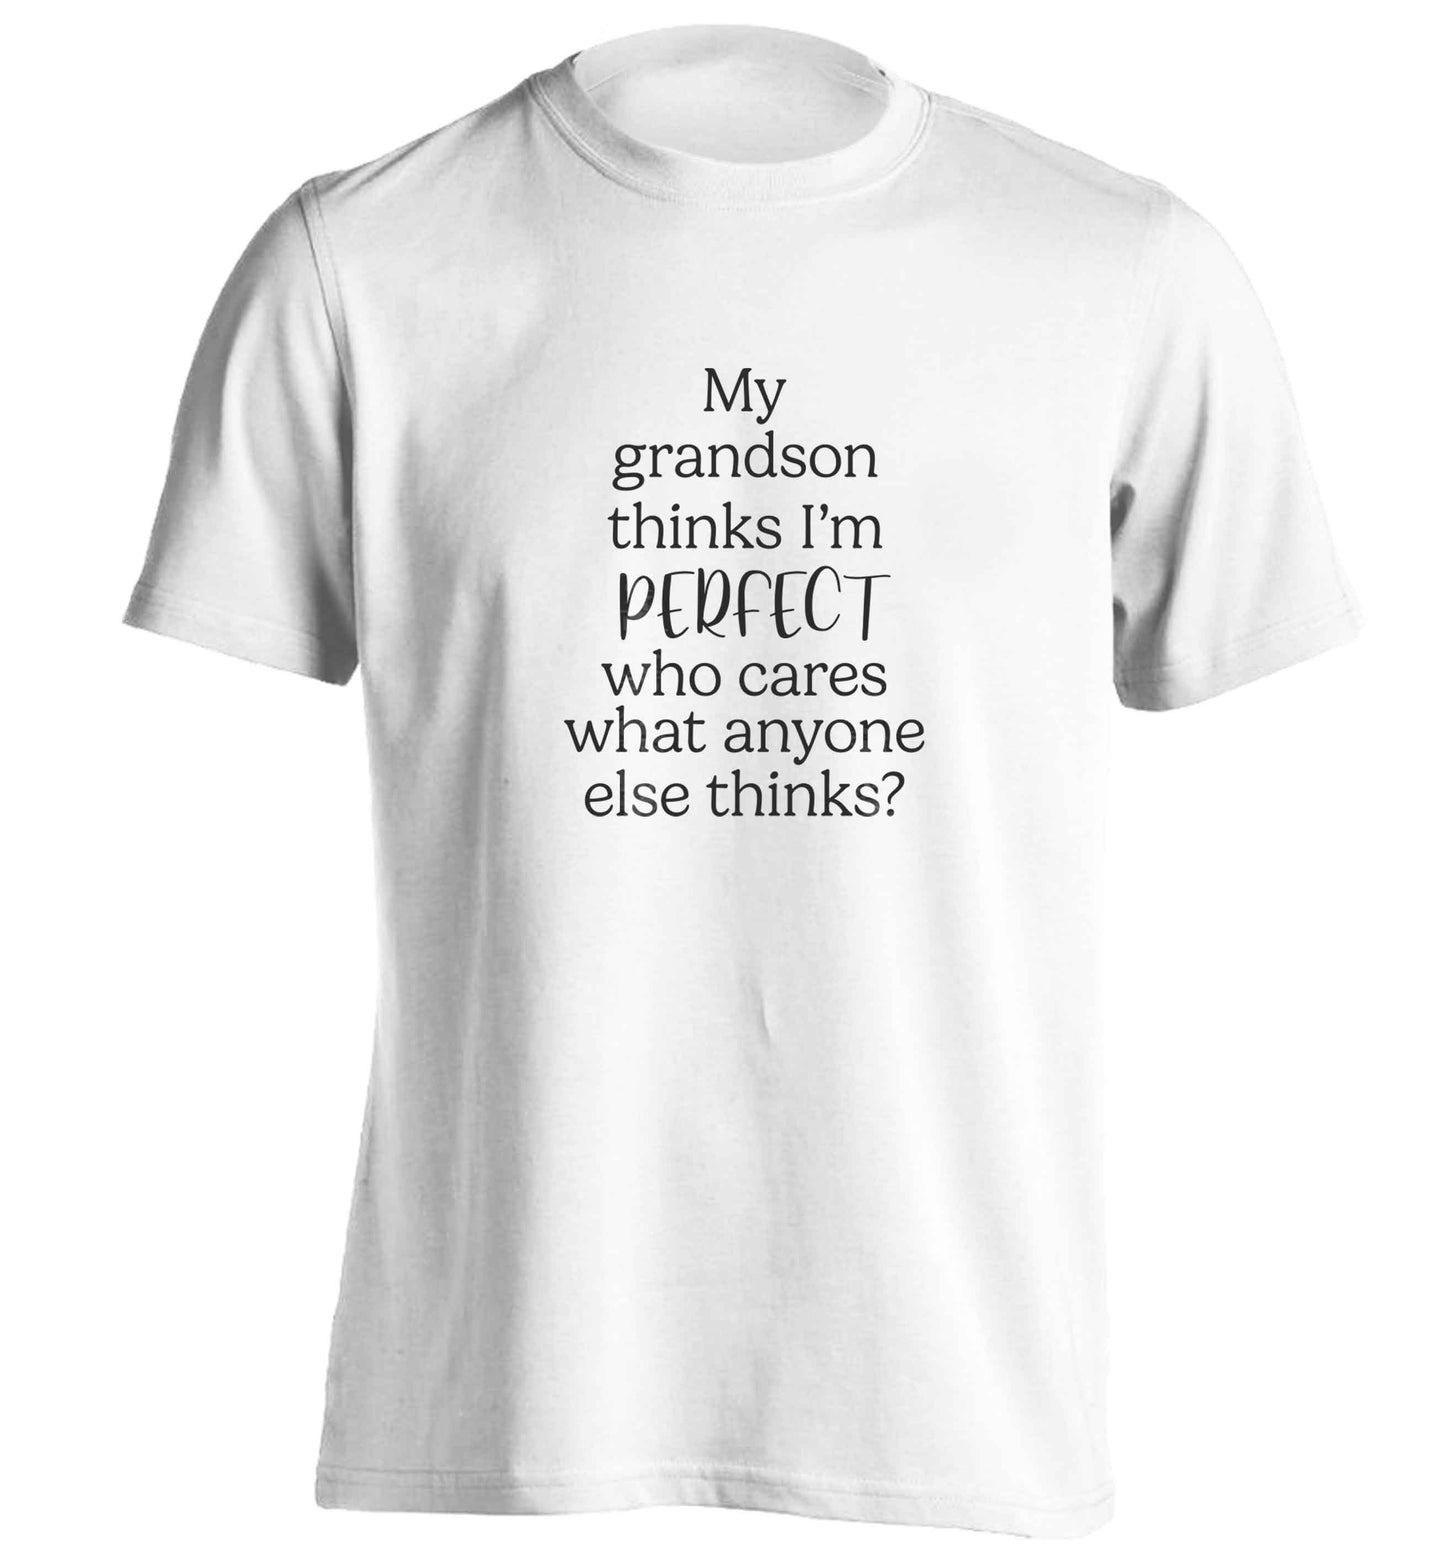 My Grandson thinks I'm perfect who cares what anyone else thinks? adults unisex white Tshirt 2XL